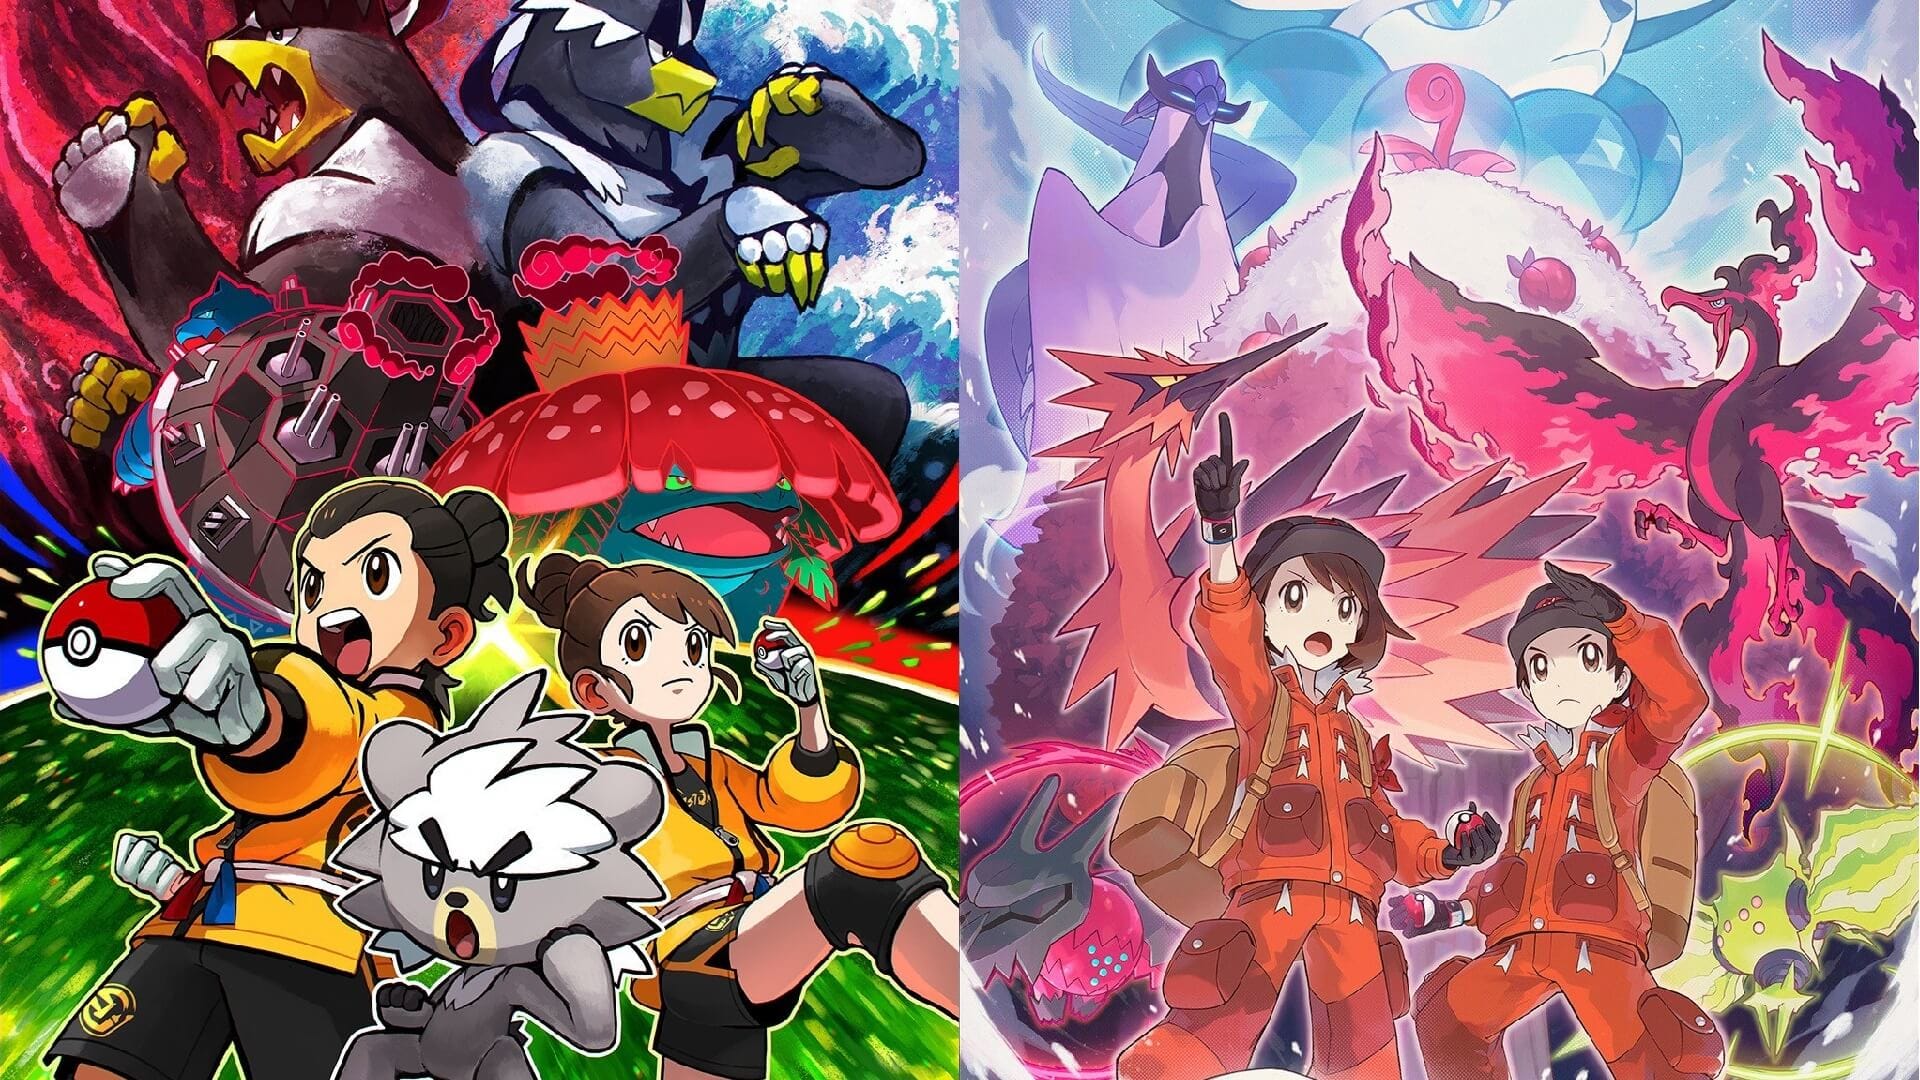 Your favourite Pokémon is probably not in Pokémon Sword and Shield